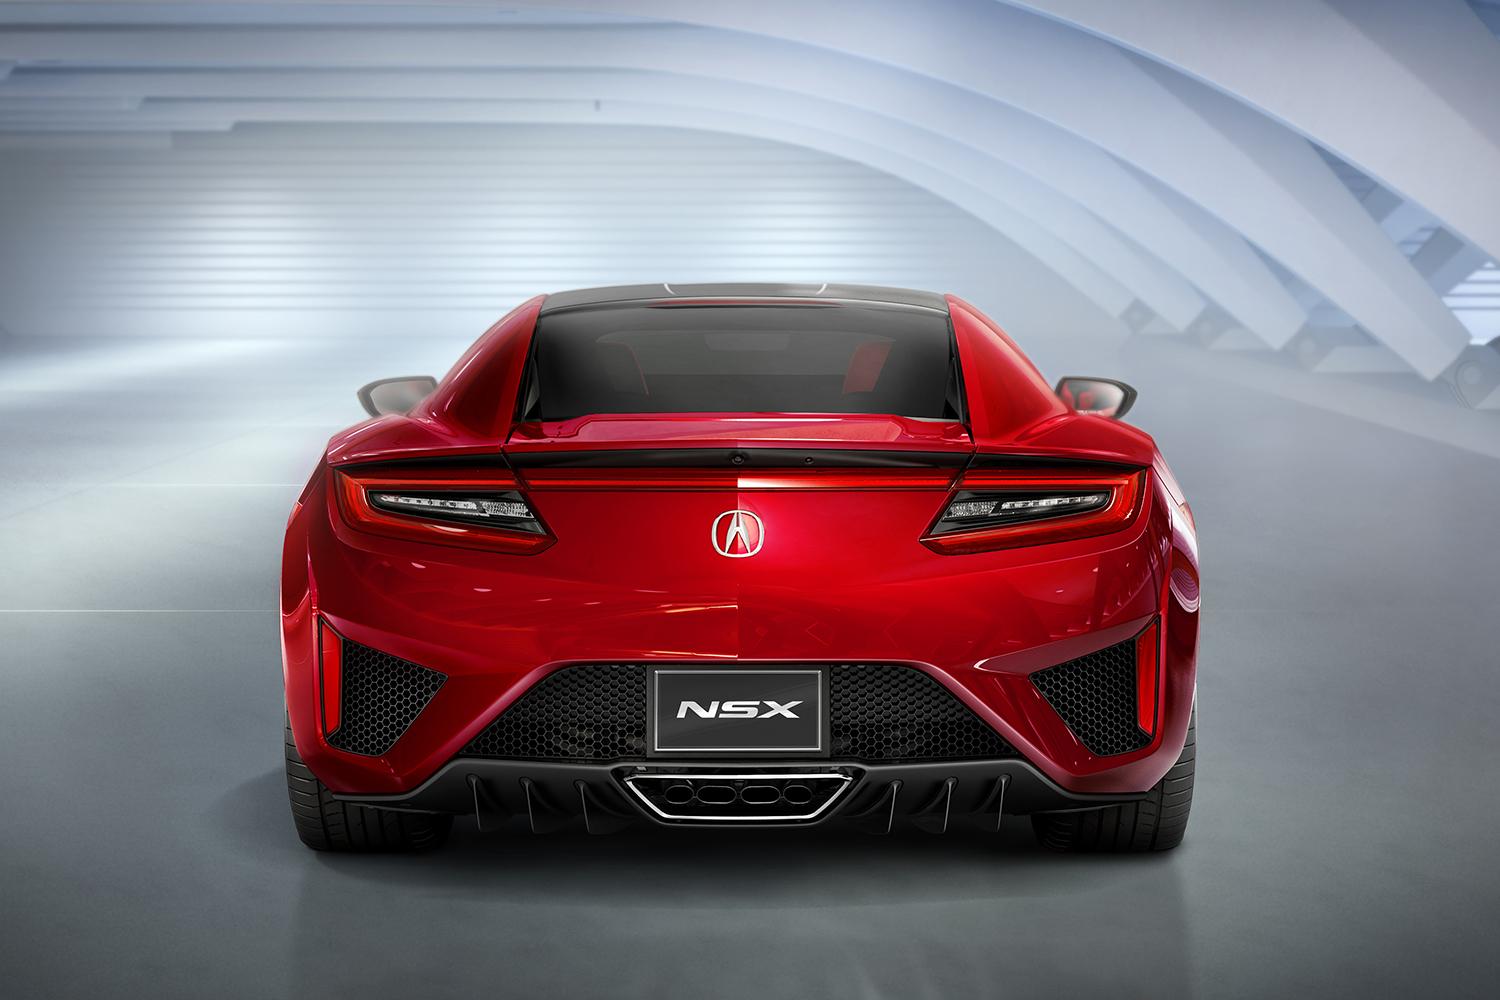 2016 acura nsx official specs pictures and performance reveal das2015 023